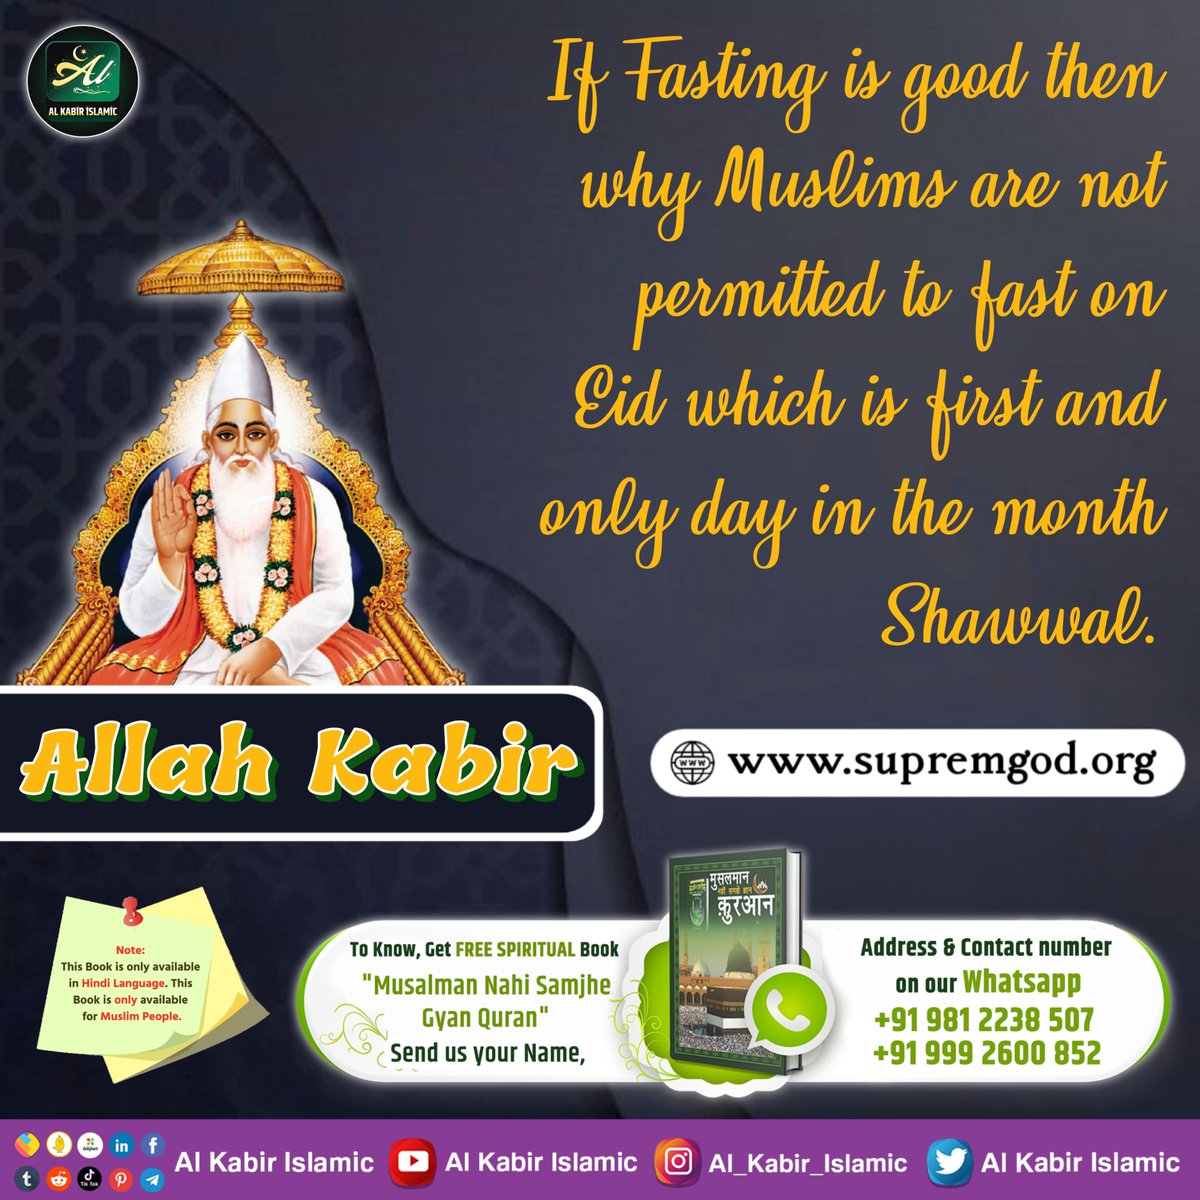 If Fasting is good then why Muslims are not permitted to fast on Eid which is first and only day in the month Shawwal?
#AlKabir_Islamic
#SaintRampalJiMaharaj  🌟🙏